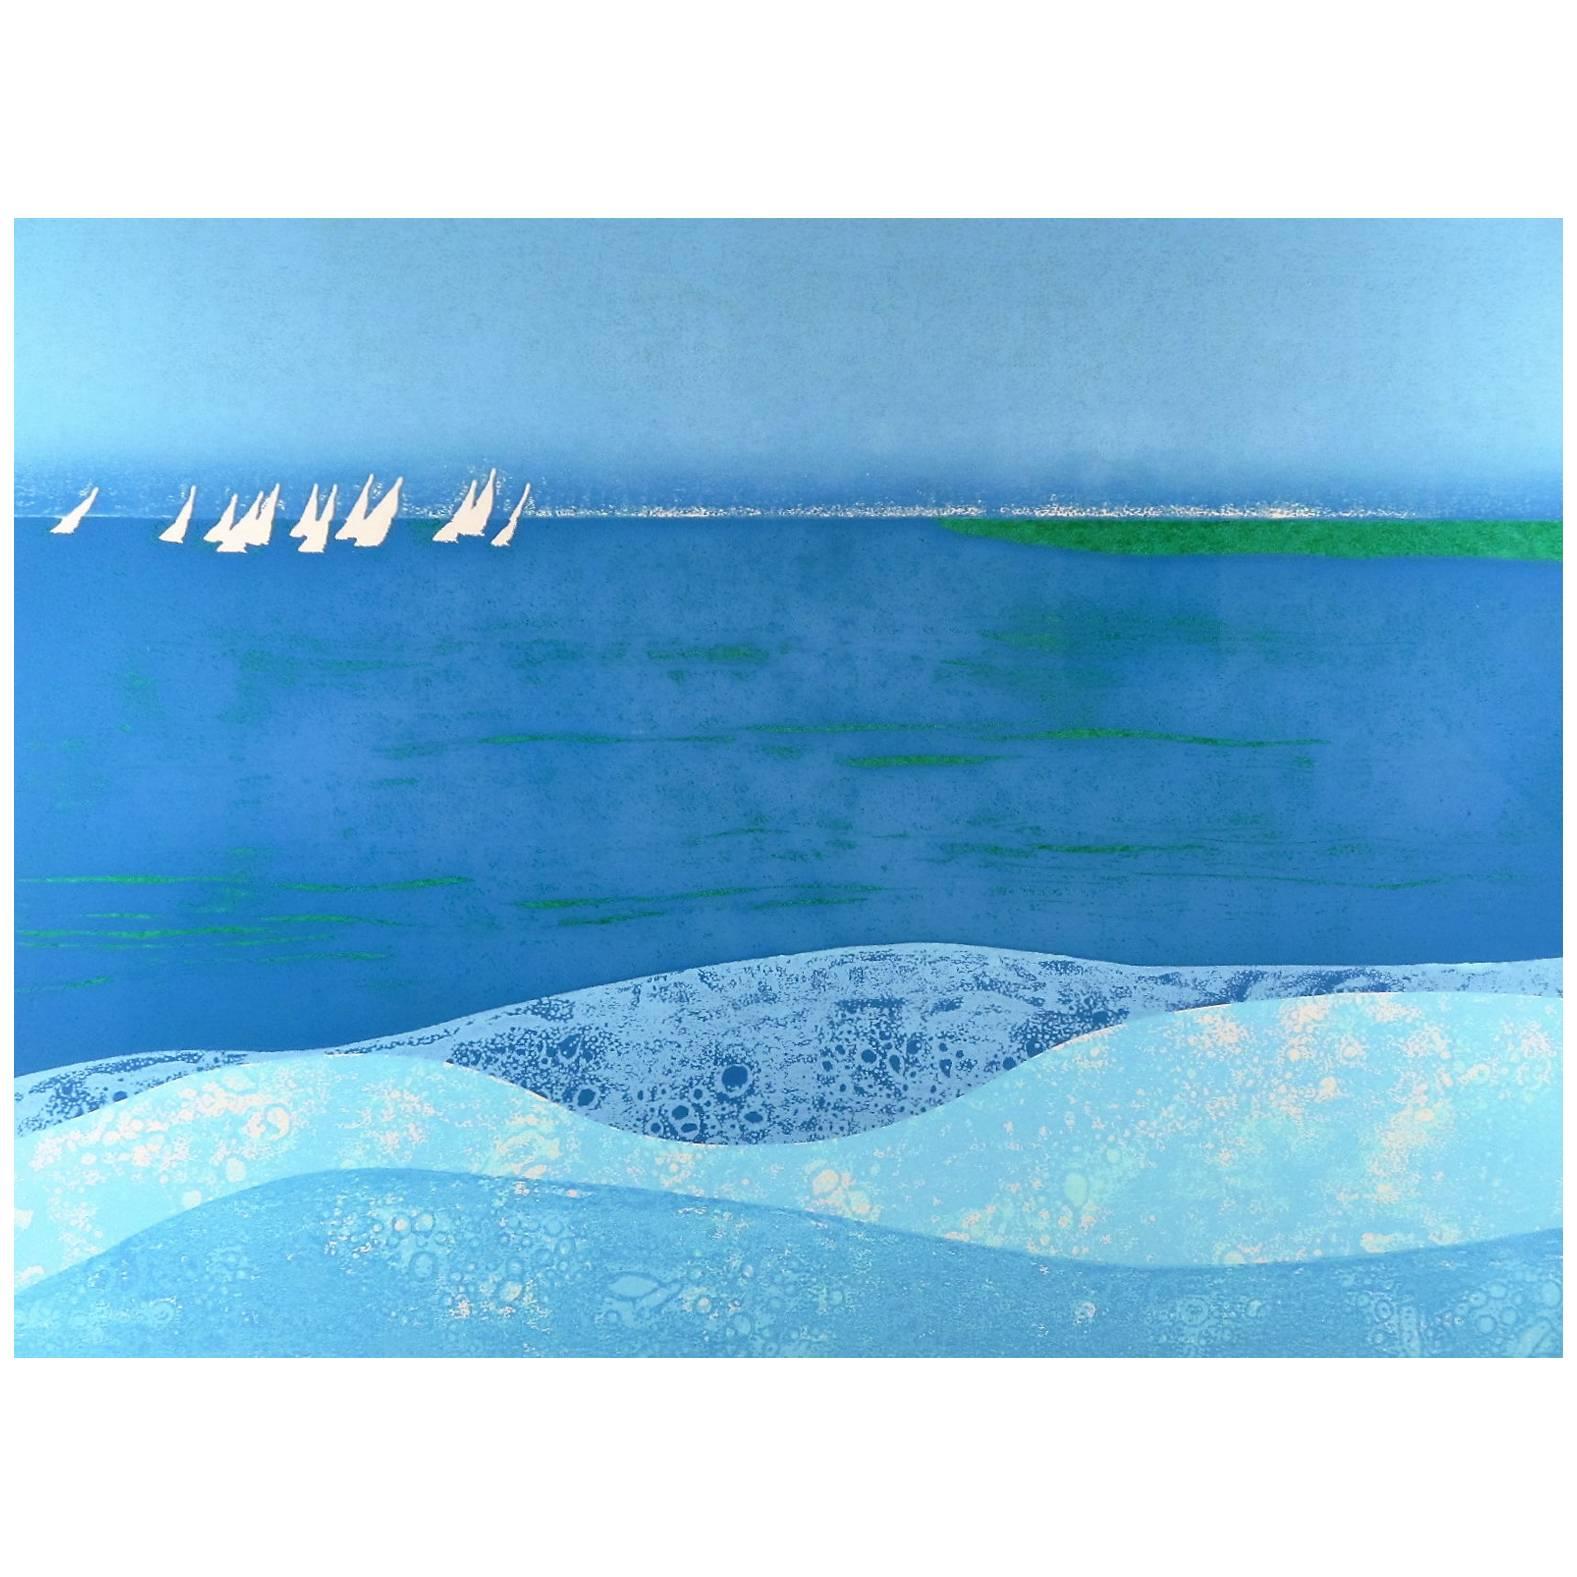 "Sunday Sail" Signed and Numbered Print by Hawaiian Artist Louis Pohl For Sale